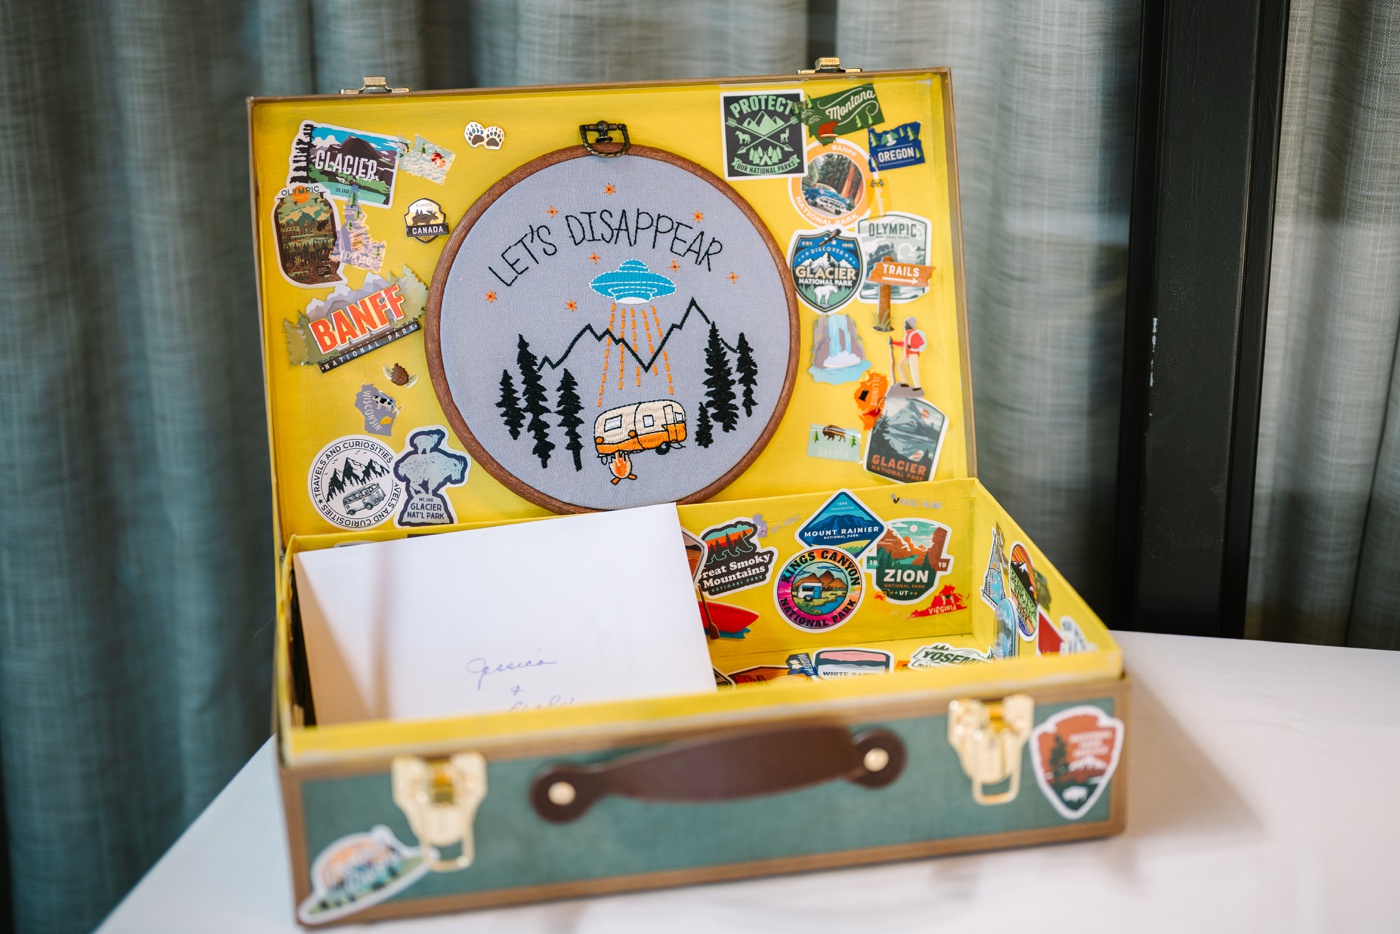 Wedding card box with a "Let's Disappear" embroidery hoop and National Park stickers